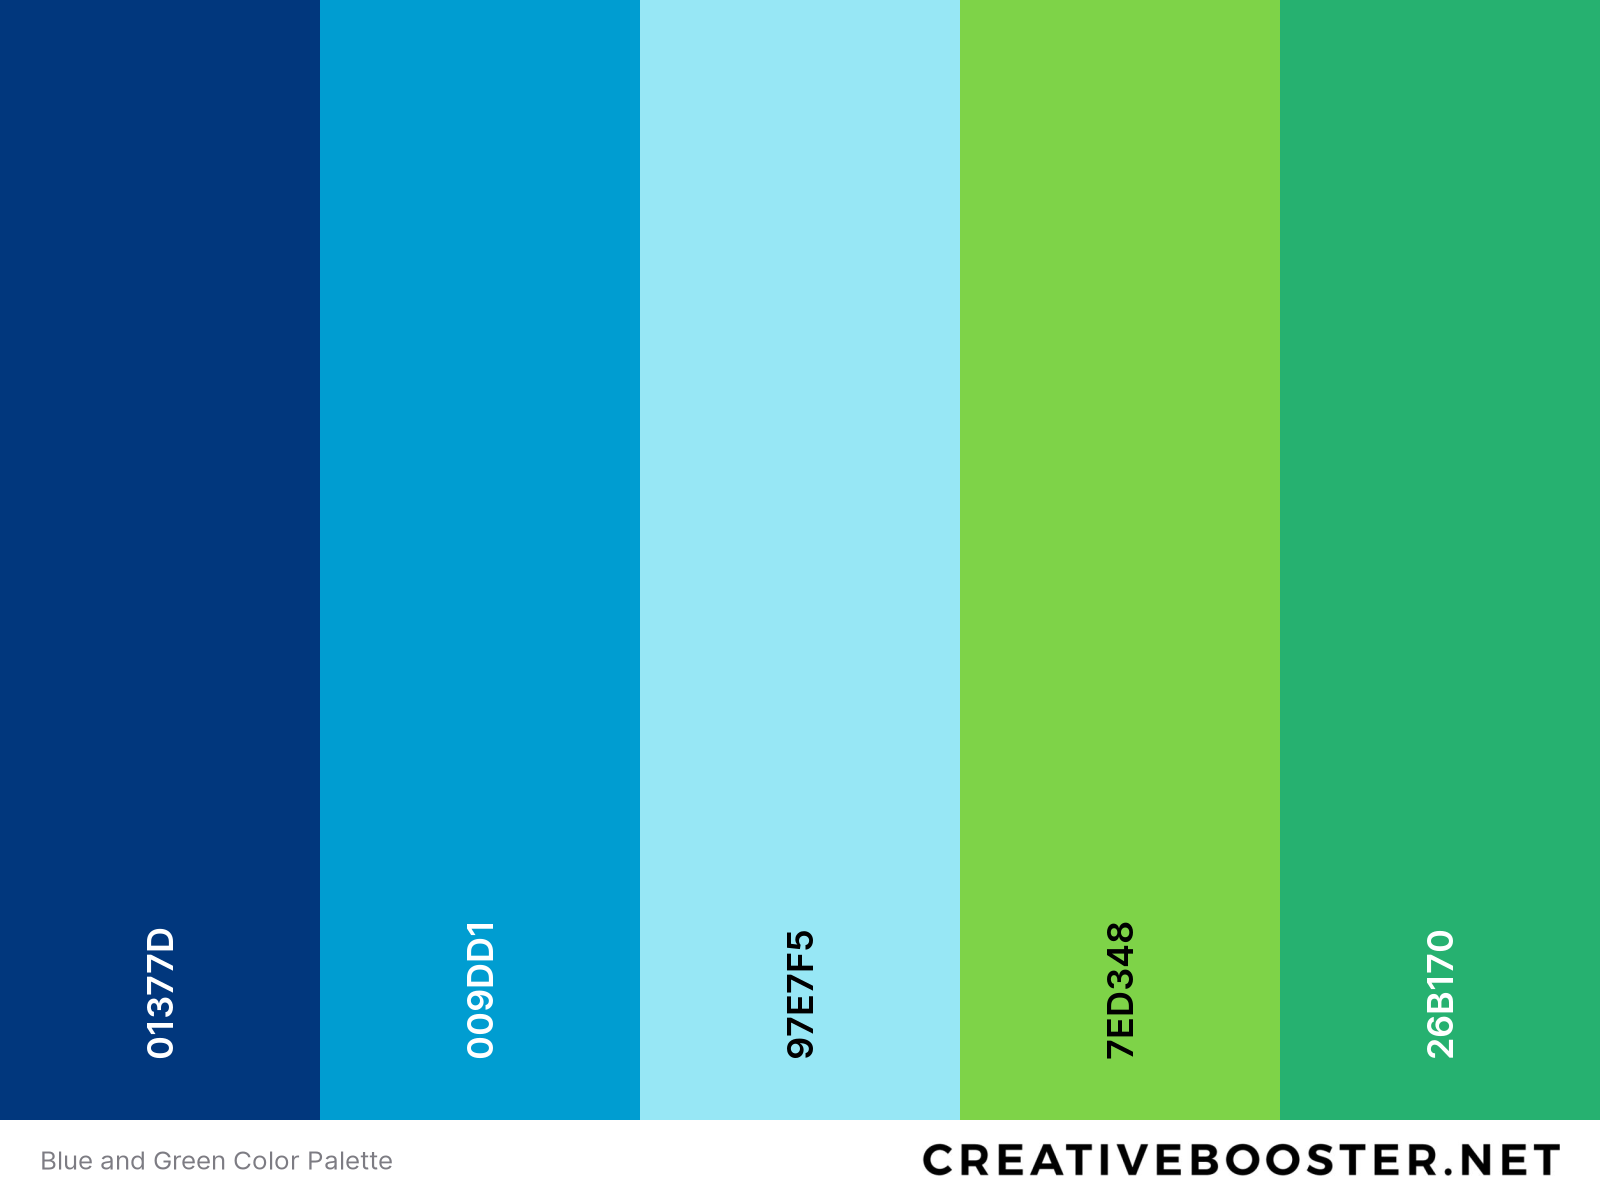 Blue and Green Color Palette